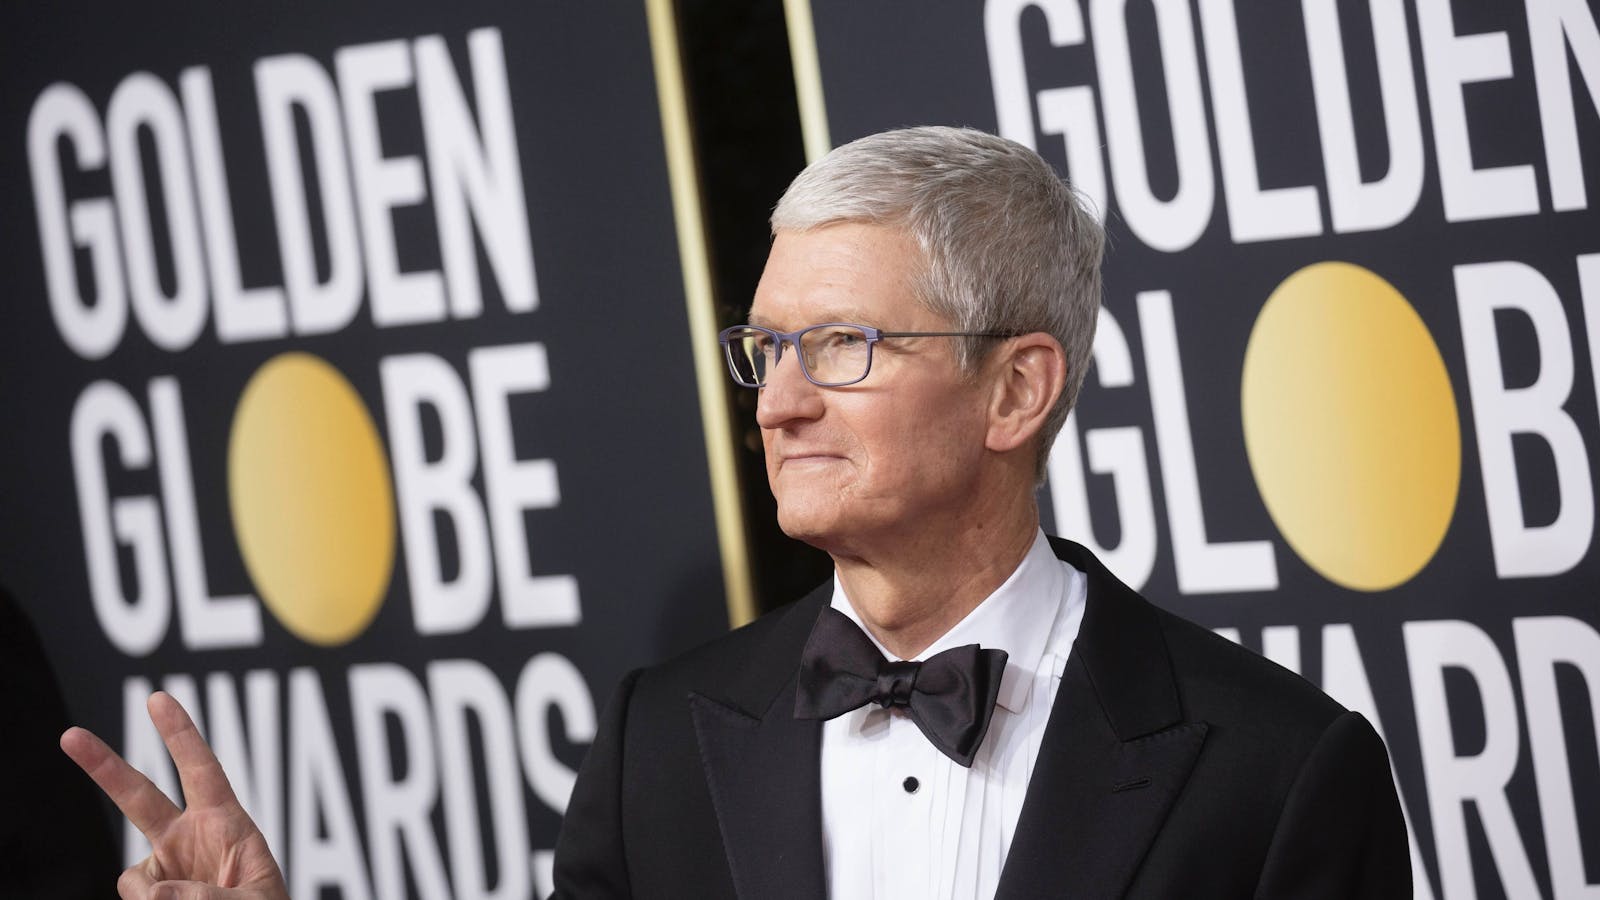 Apple CEO Tim Cook at the Golden Globe awards in 2020. Photo by AP